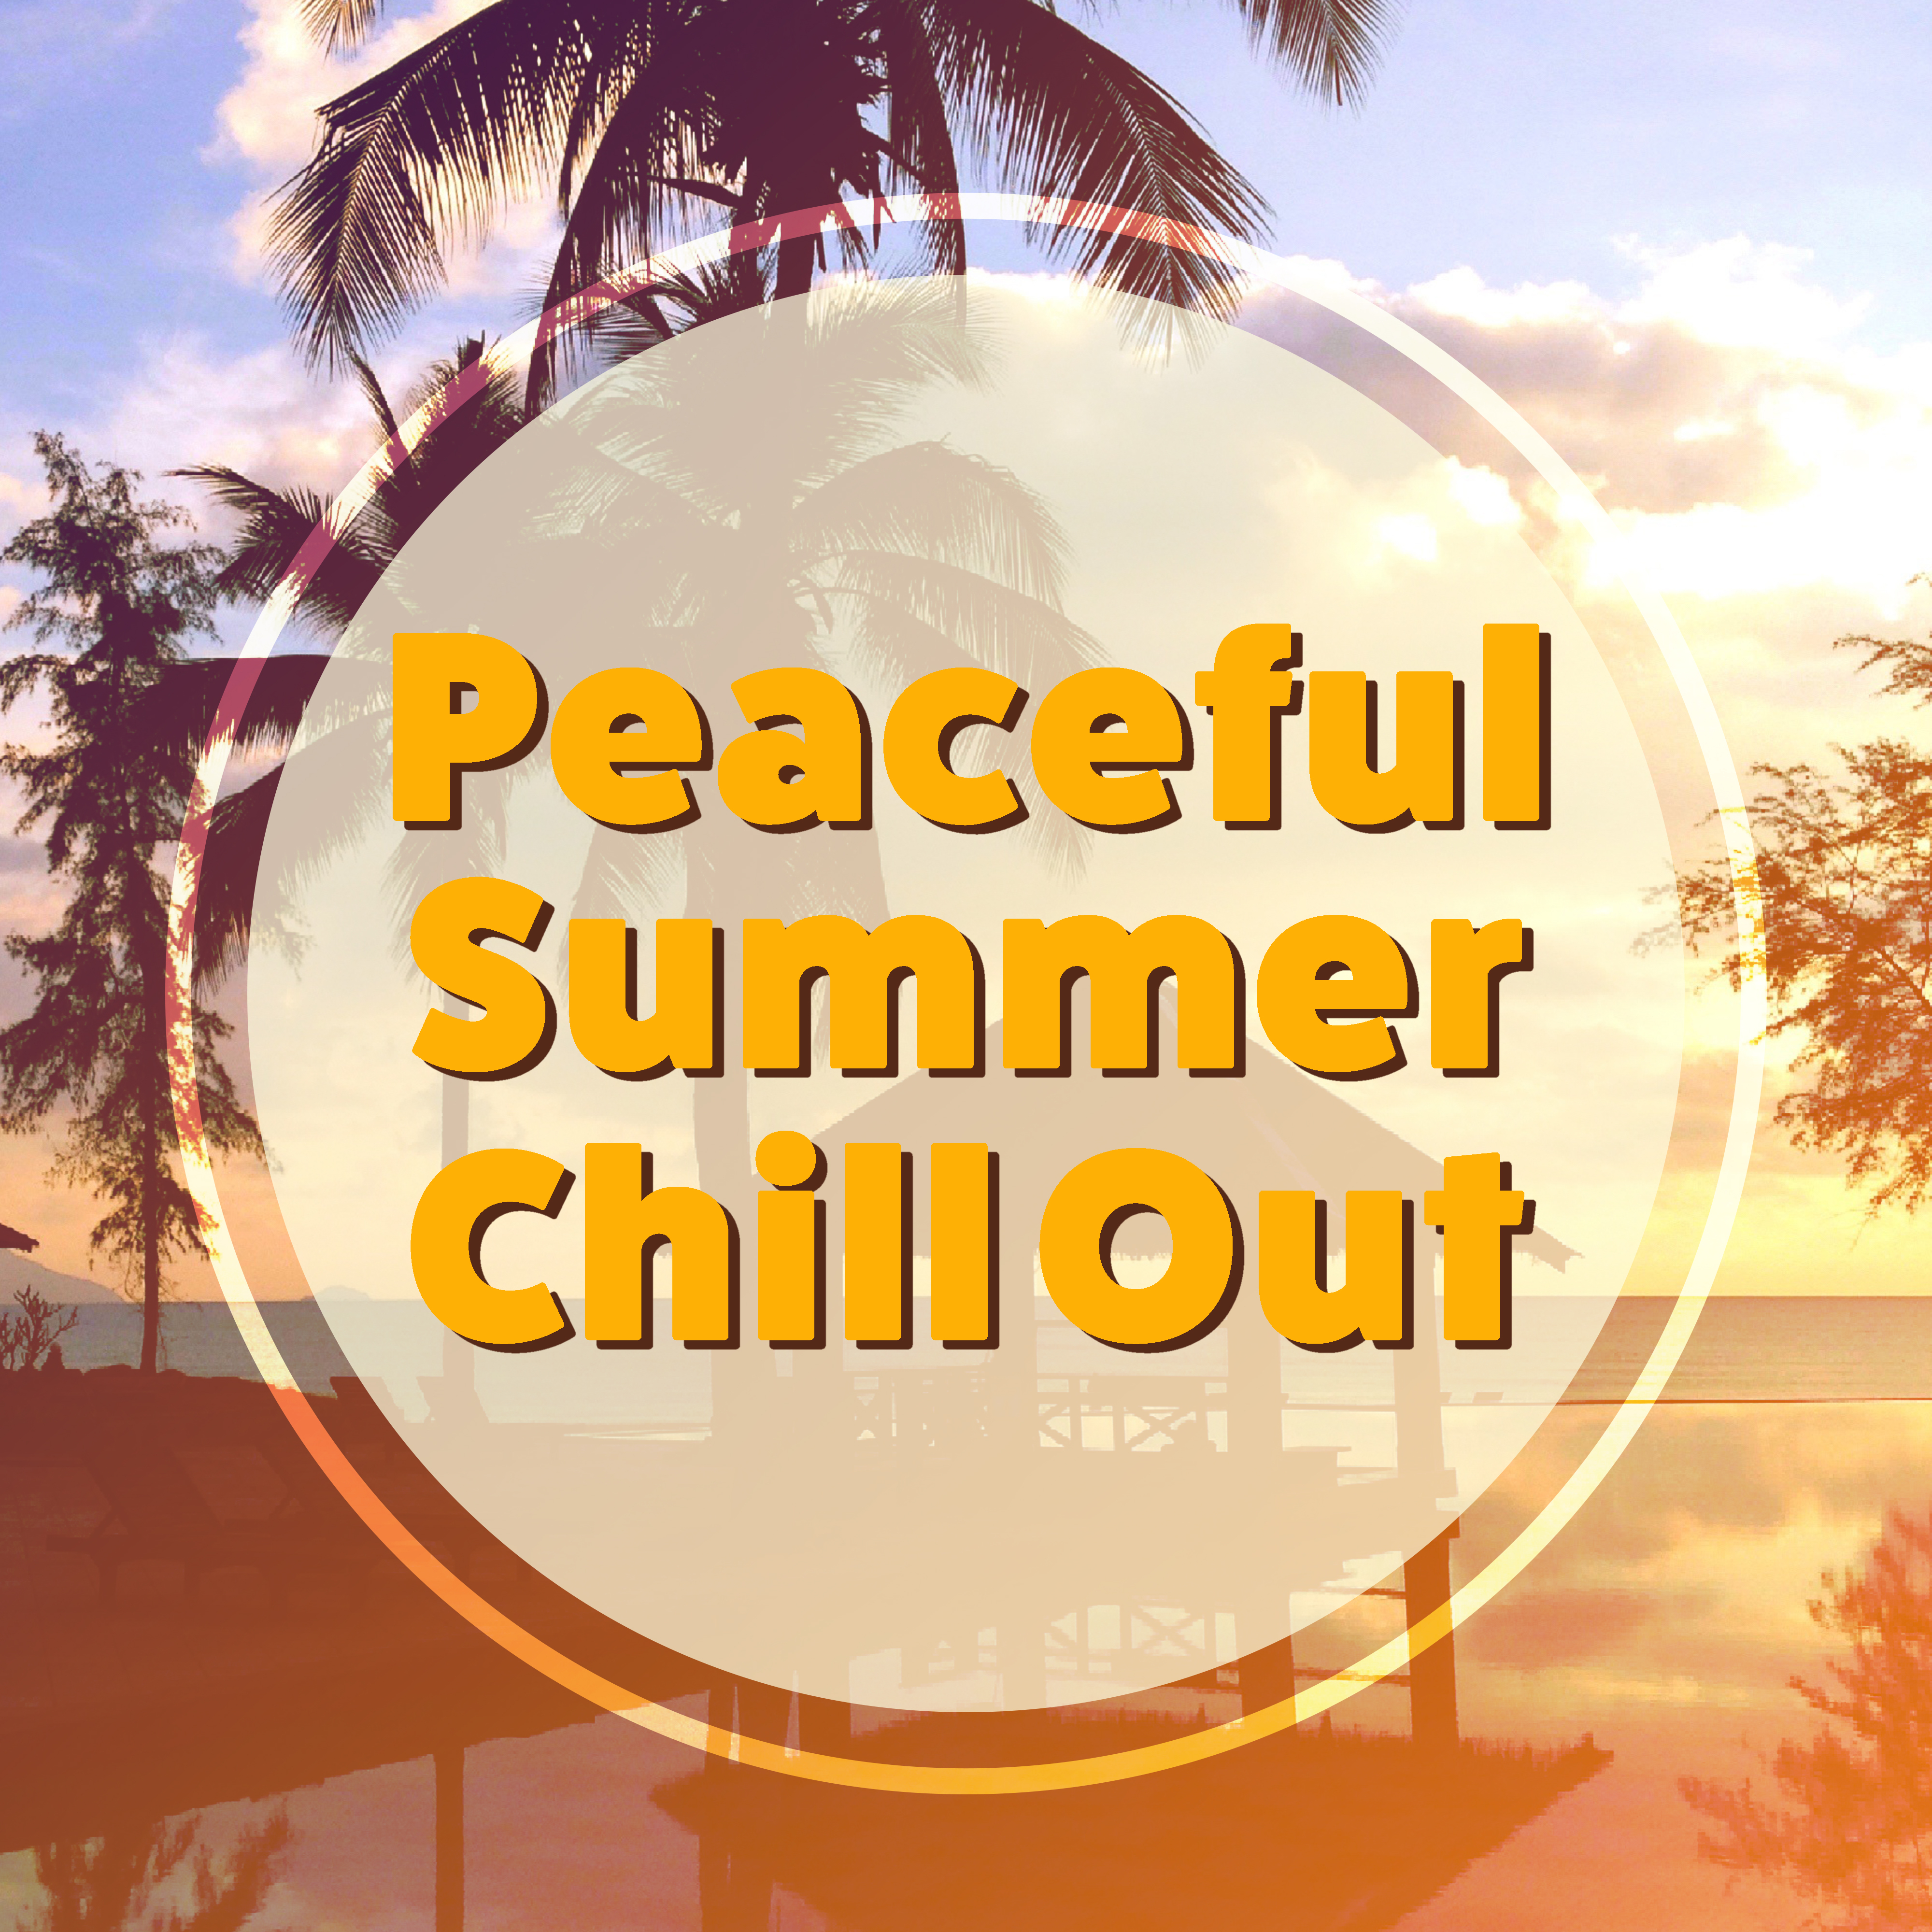 Peaceful Summer Chill Out  Calm Songs for Summer, Chill Out Island, Stress Relief, Ibiza Rest